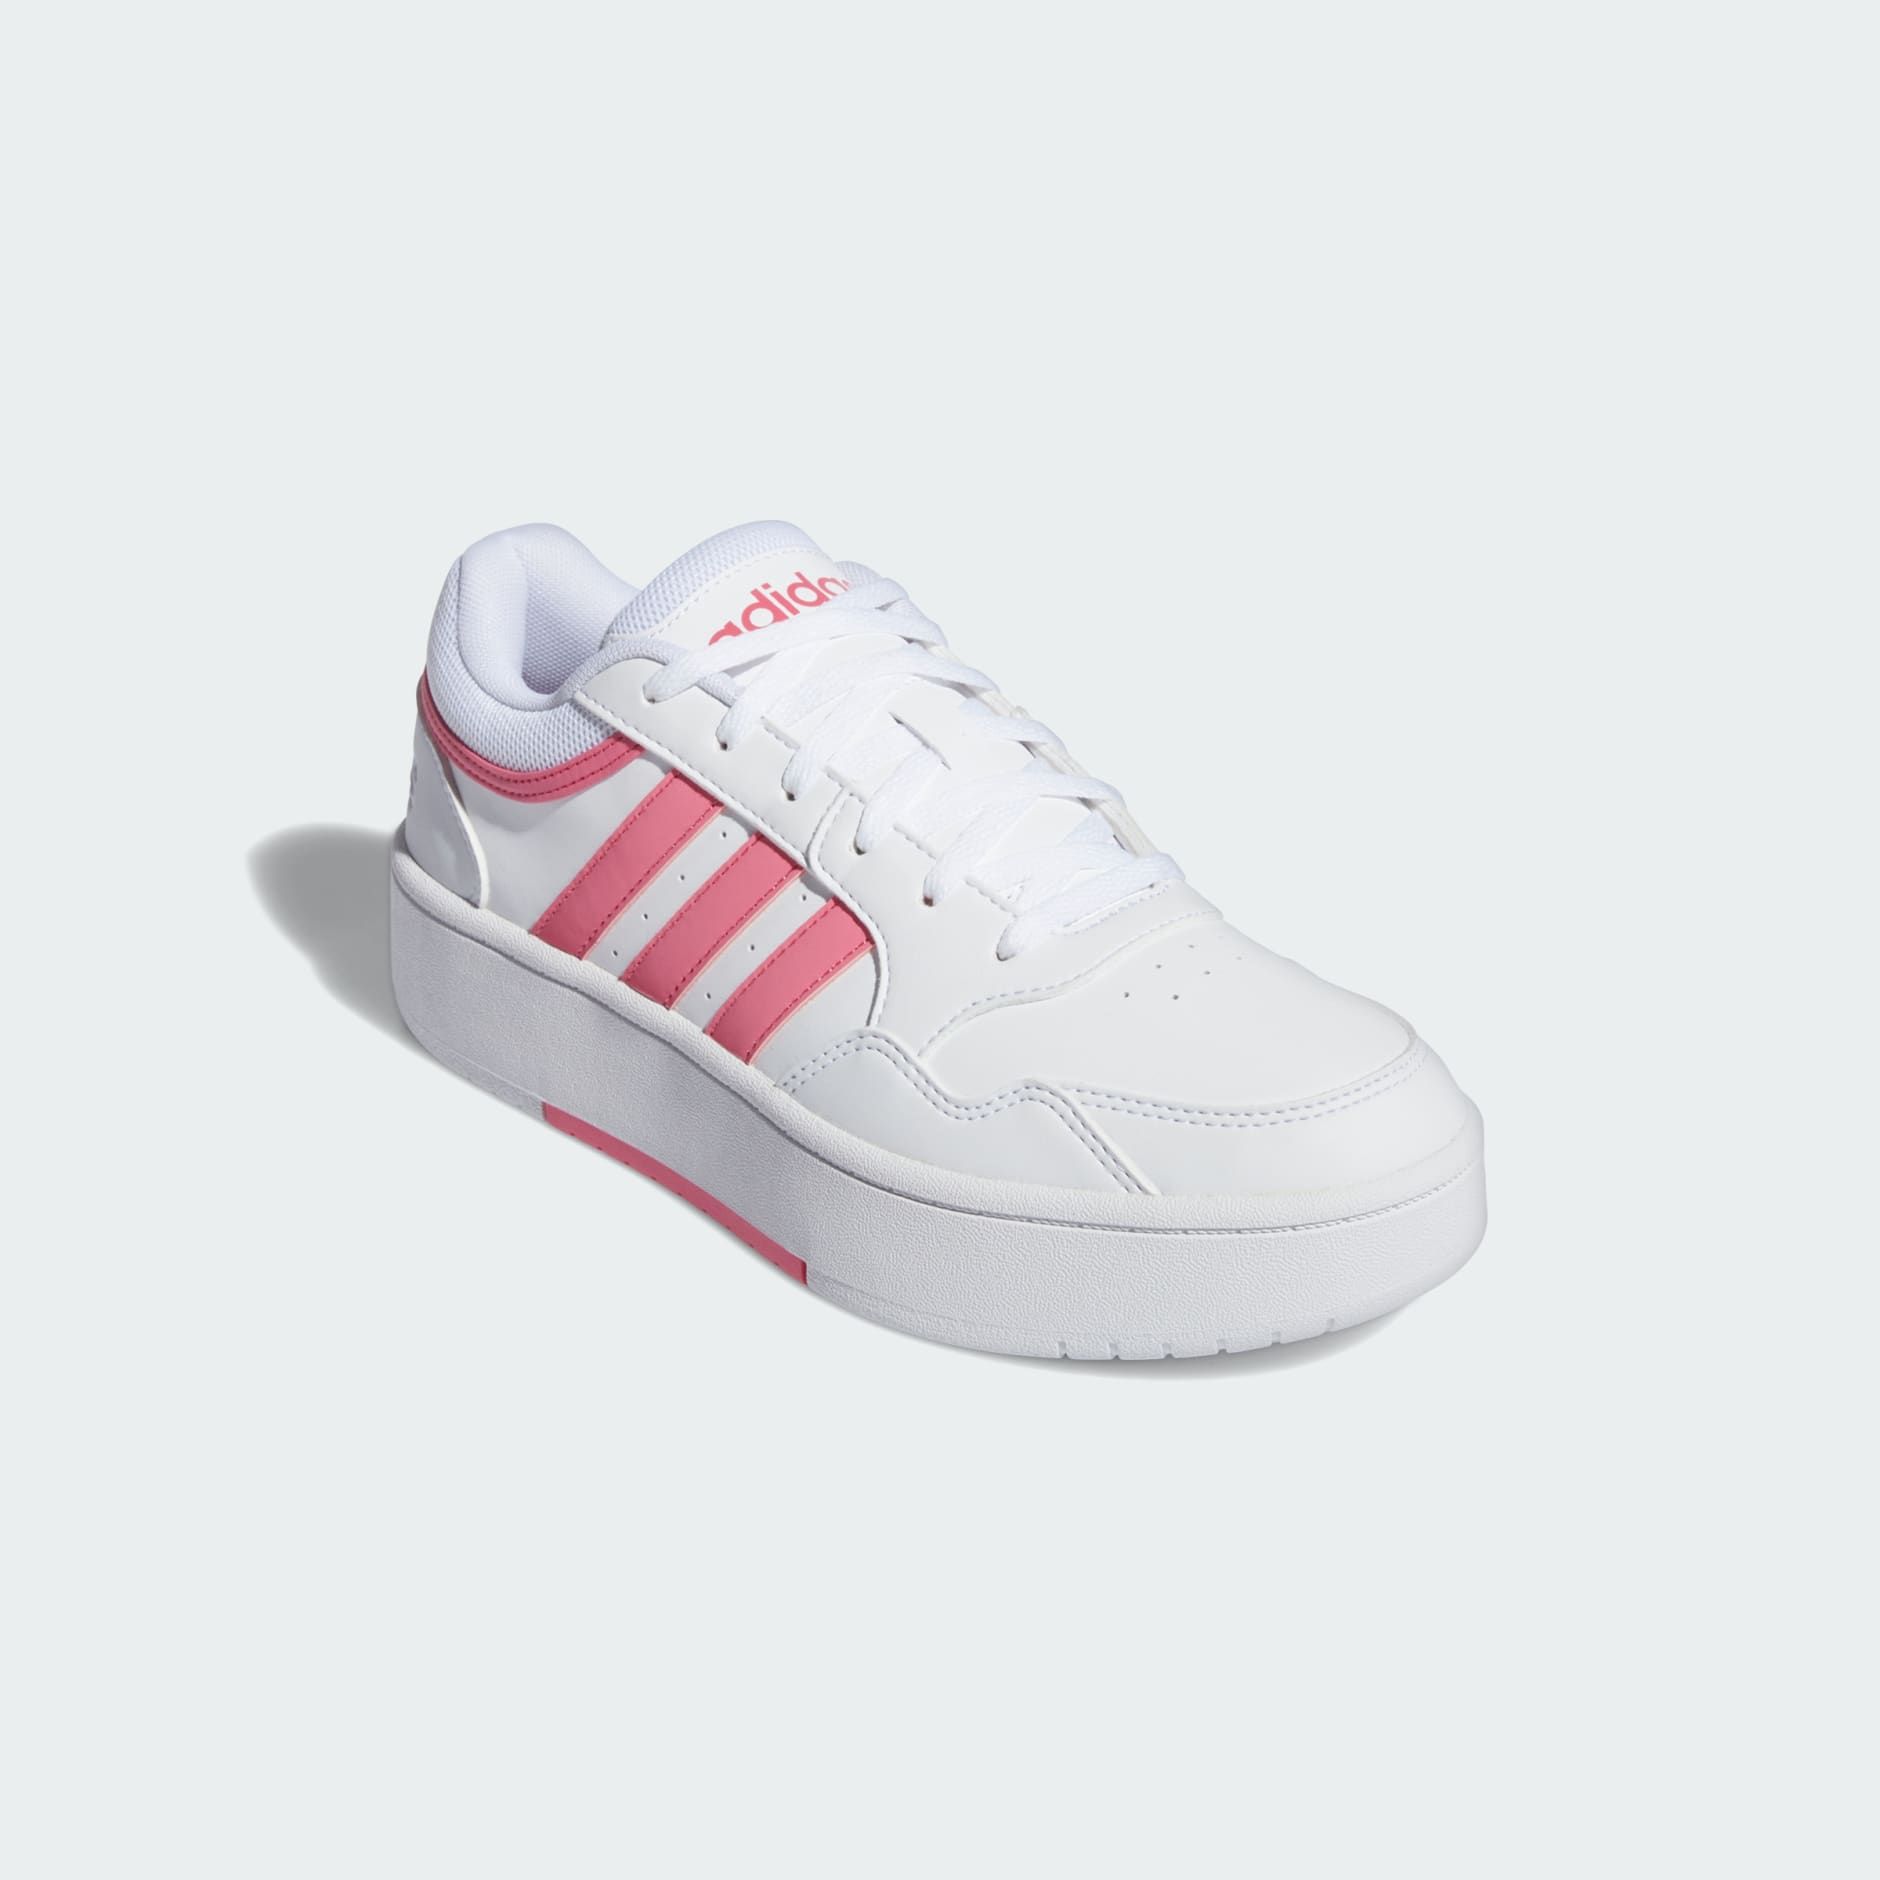  adidas Hoops 3.0 Bold - White / Pink Fusion 